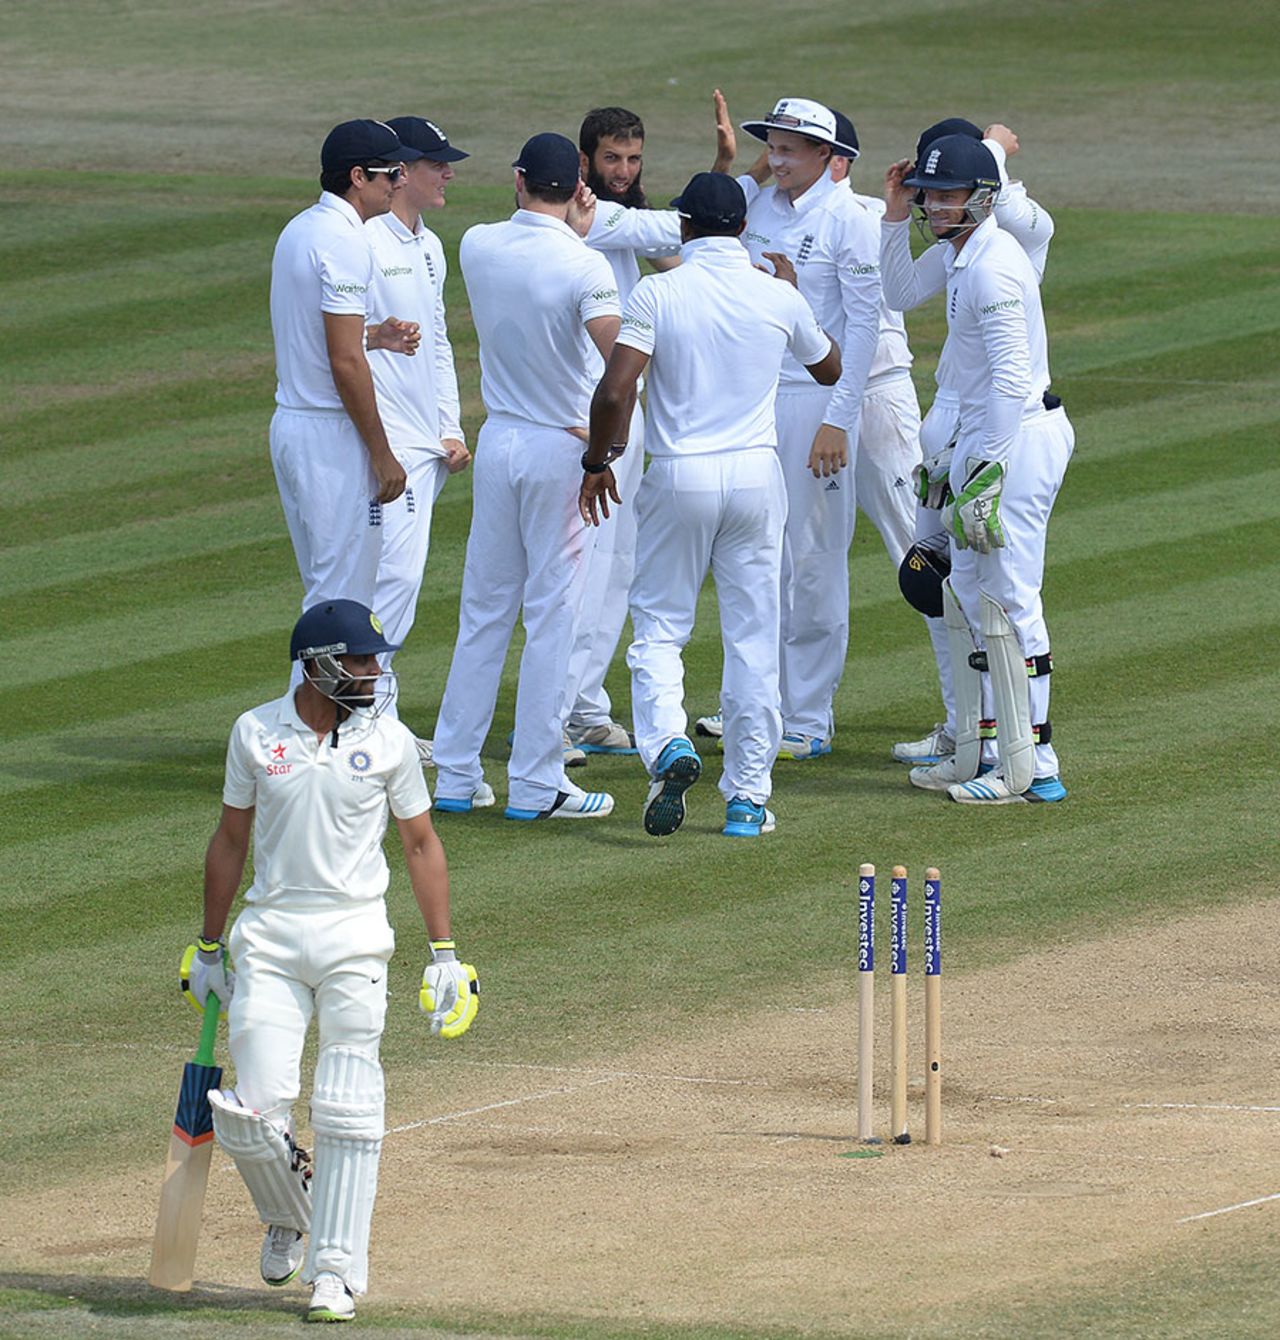 Ravi Jadeja walks off having been bowled by Moeen Ali, England v India, 3rd Investec Test, Ageas Bowl, 5th day, July 31, 2014